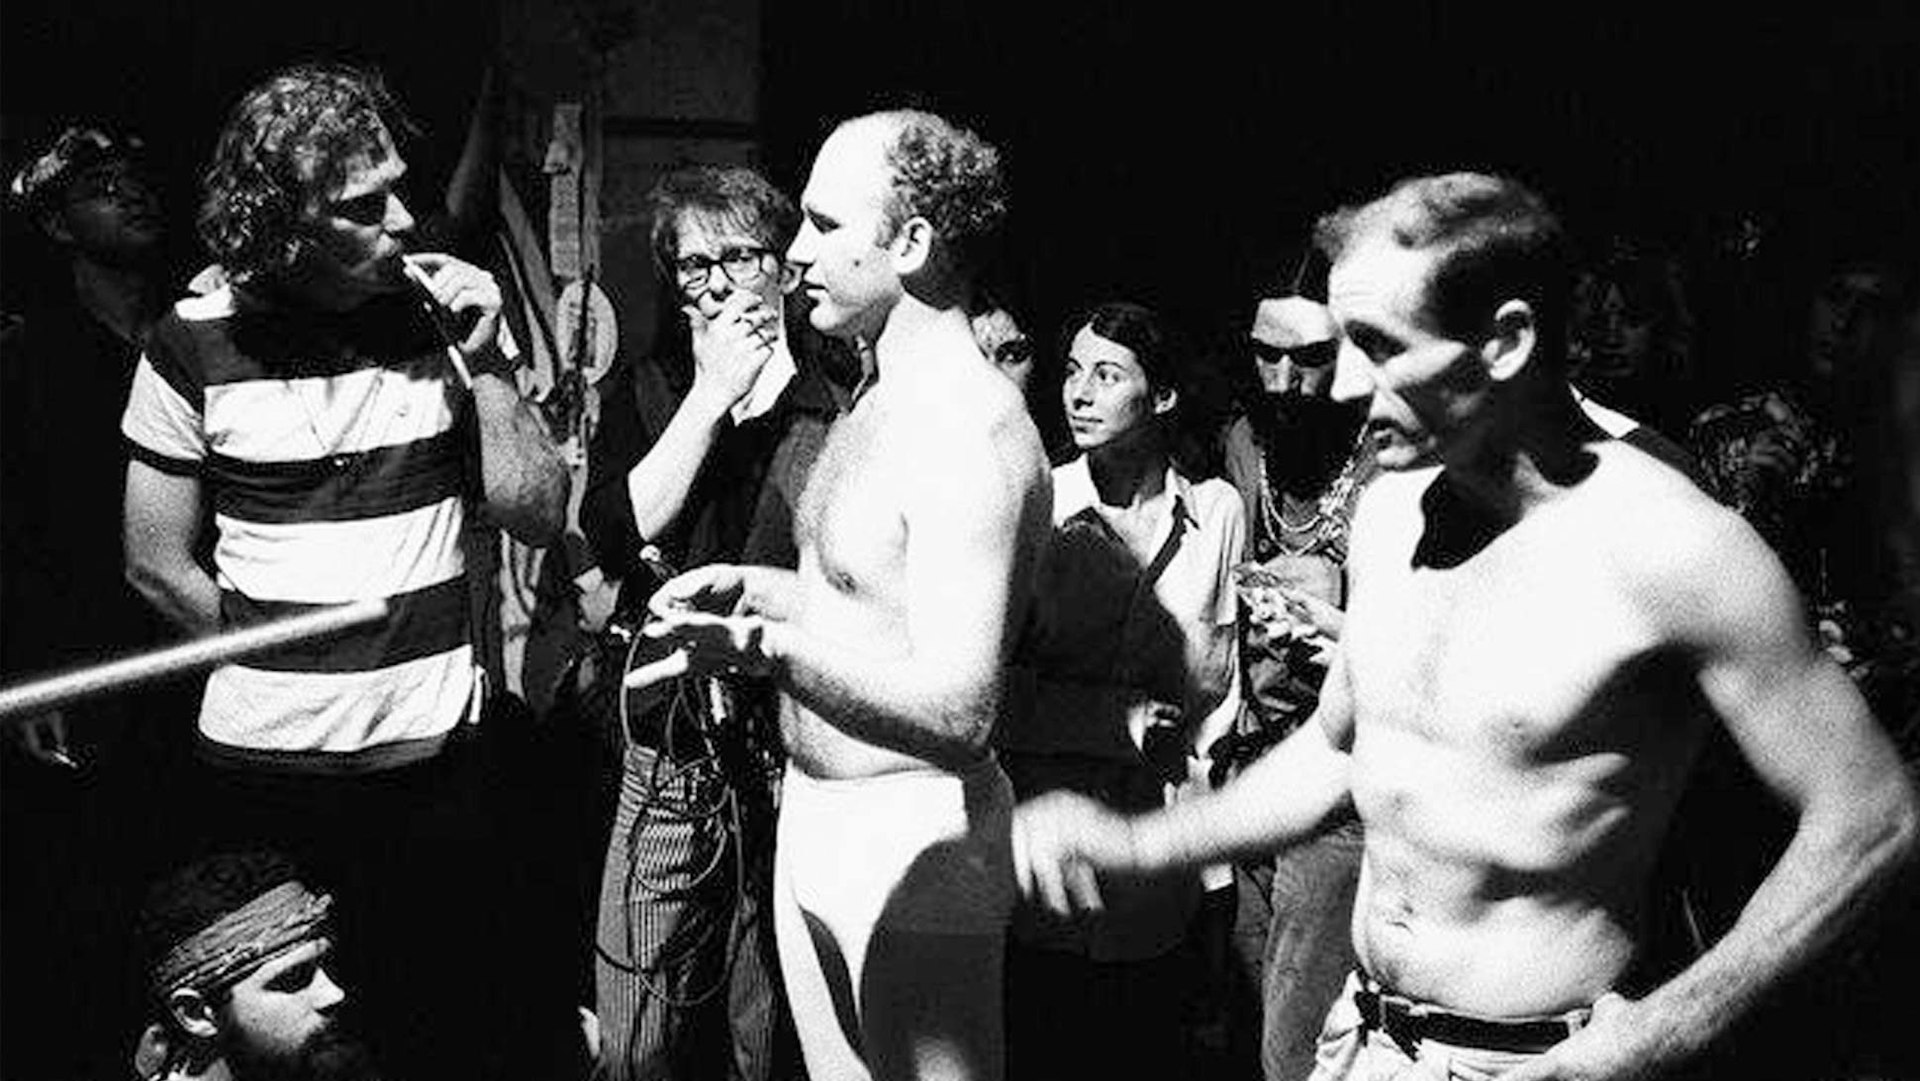 Ken Kesey and Neal Cassady bare their chests during the Merry Pranksters’ Acid Test Graduation. Photo by Ted Streshinsky, Corbis